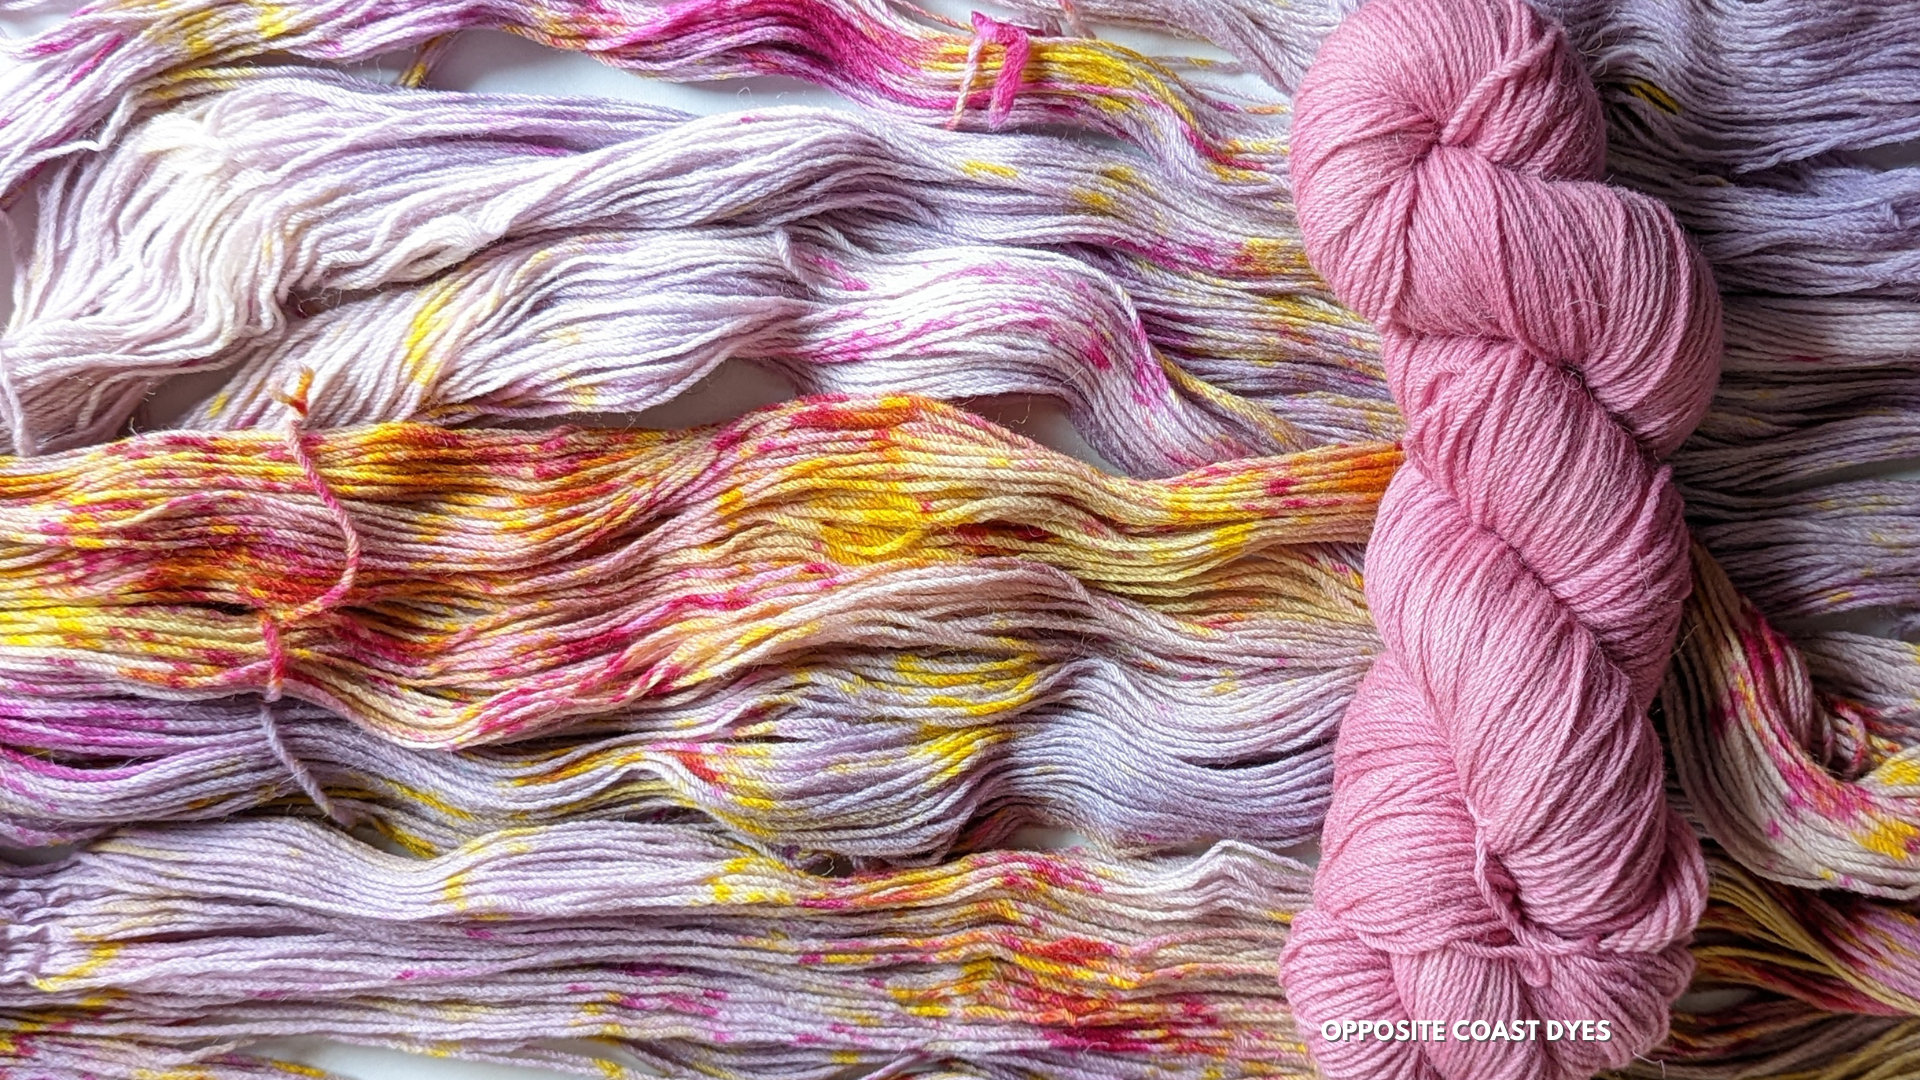 background: pink based yarn with yellow streaks and magenta speckles spread out. foreground: skein of bright pink yarn